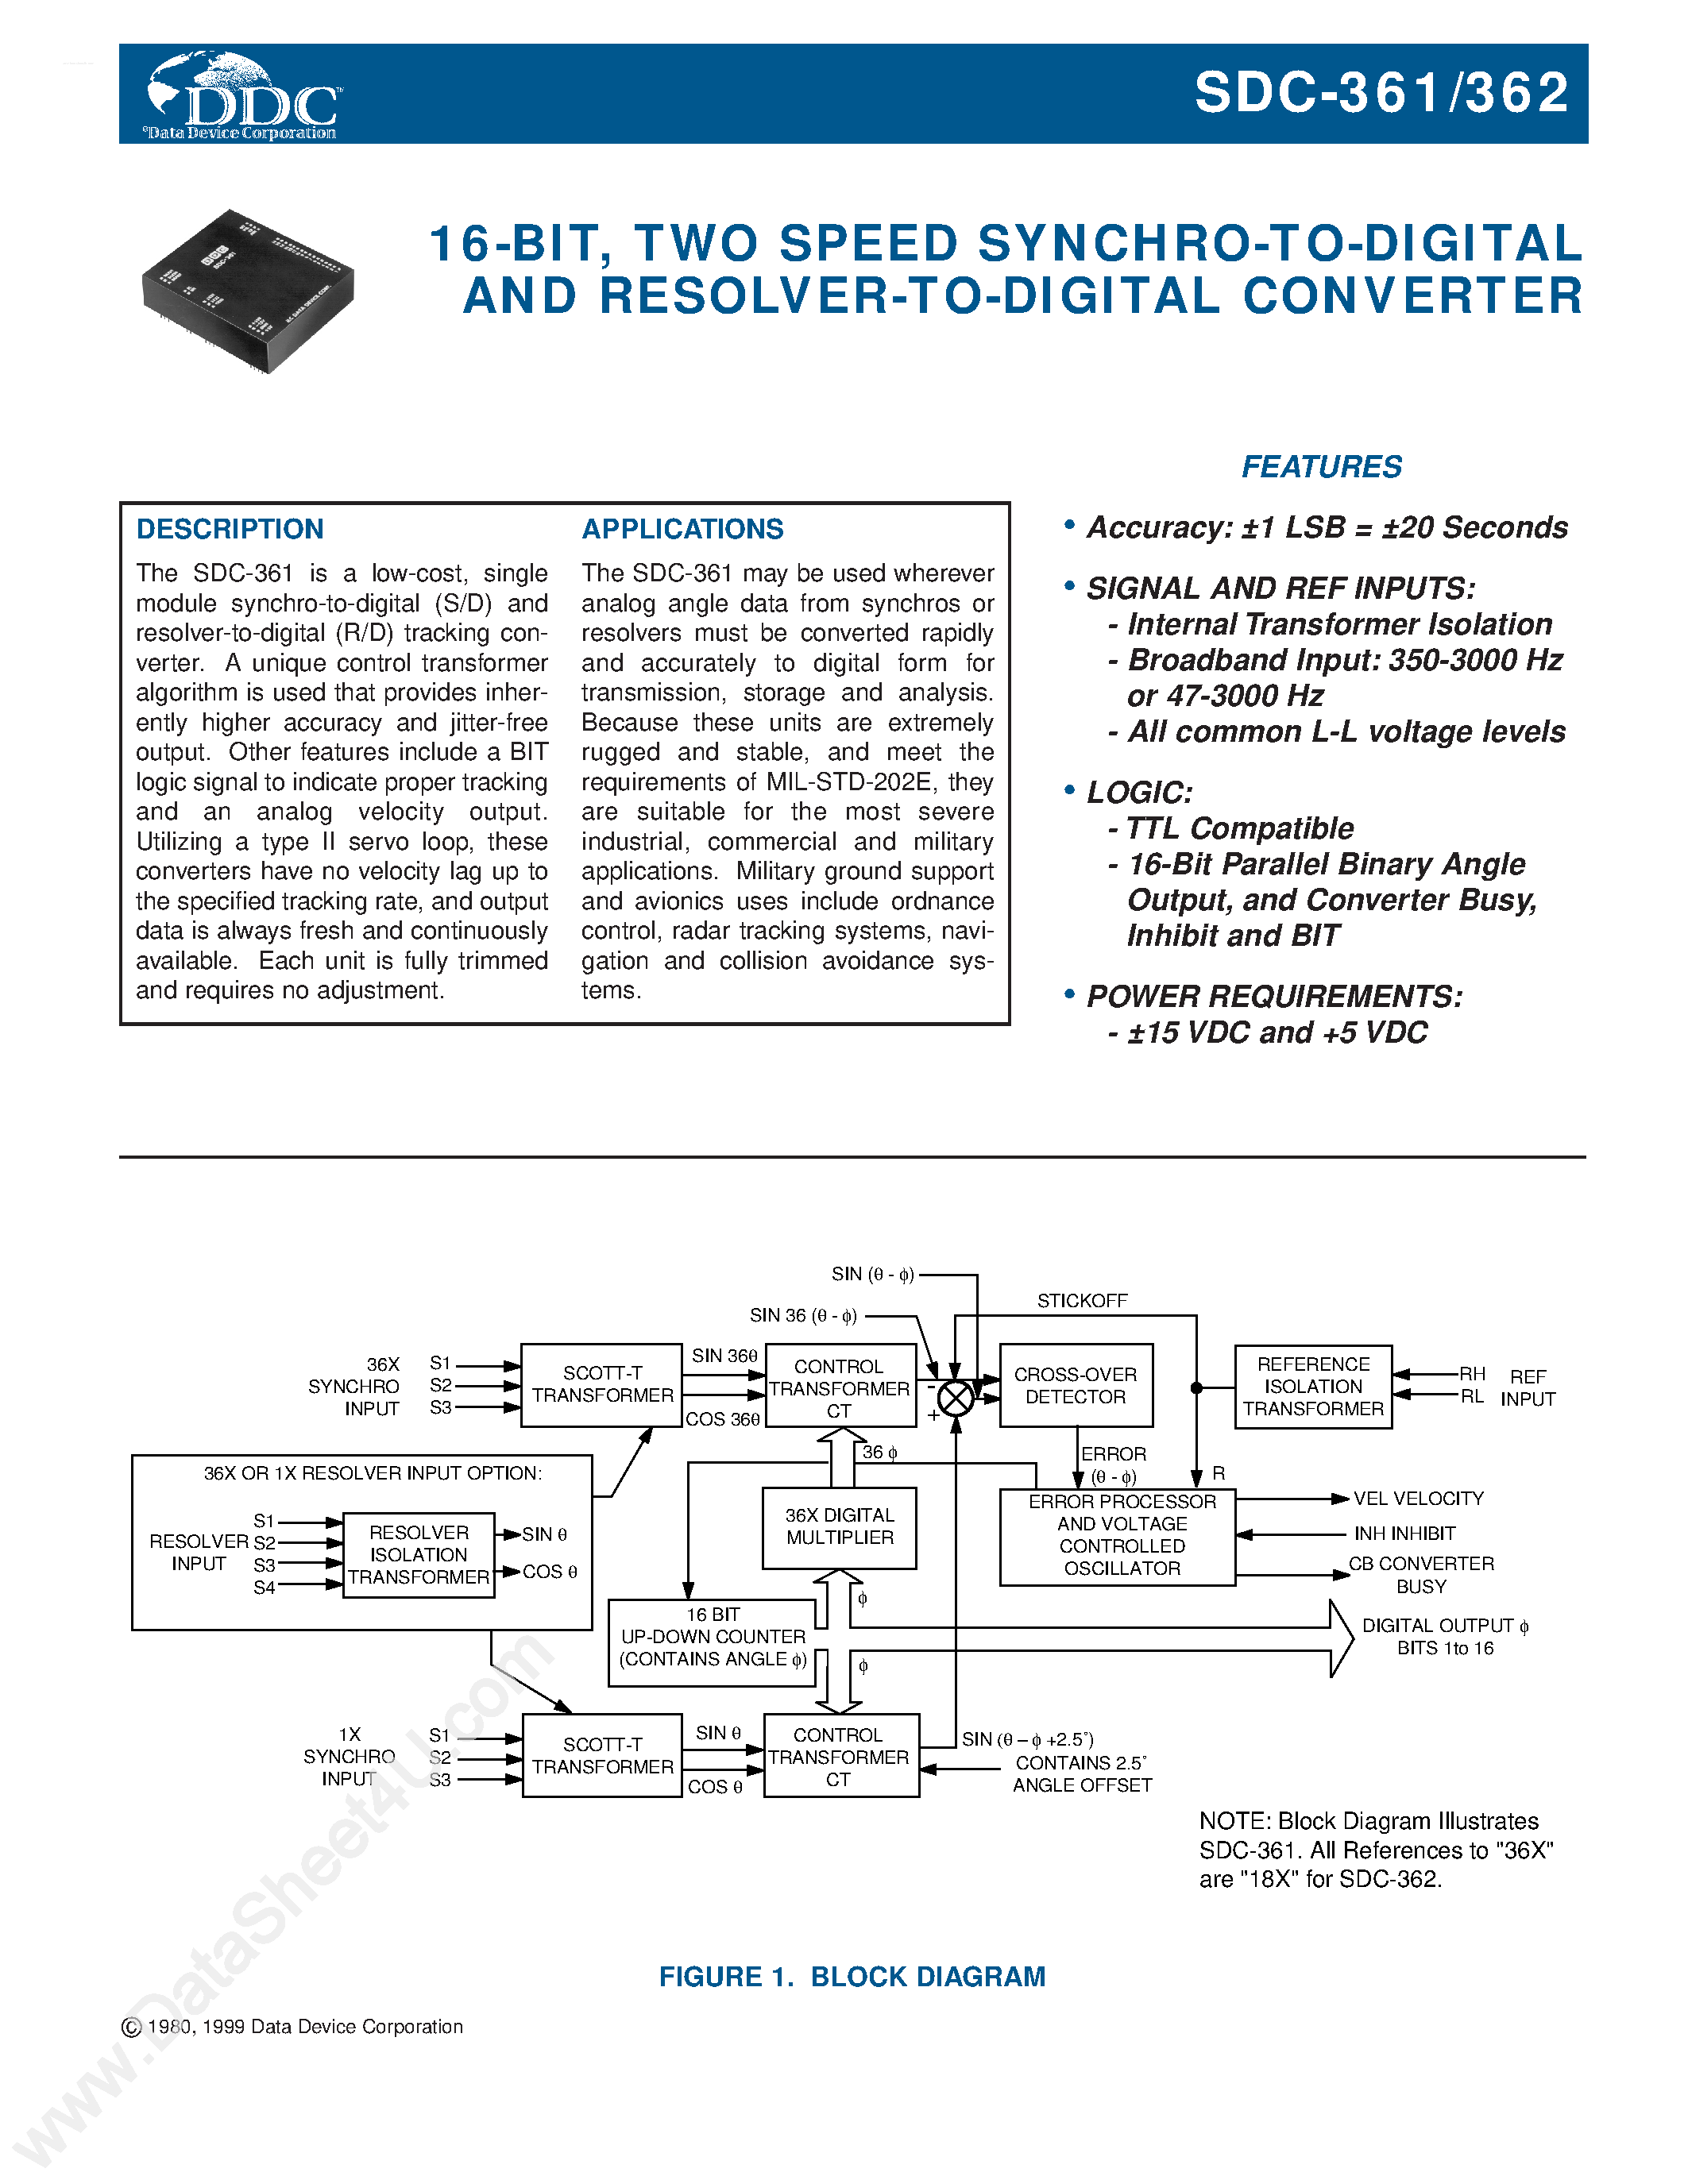 Datasheet SDC-361 - (SDC361 / SDC362) 16-Bit 2 Speed Synchro to Digital and Resolver to Digital Converter page 1